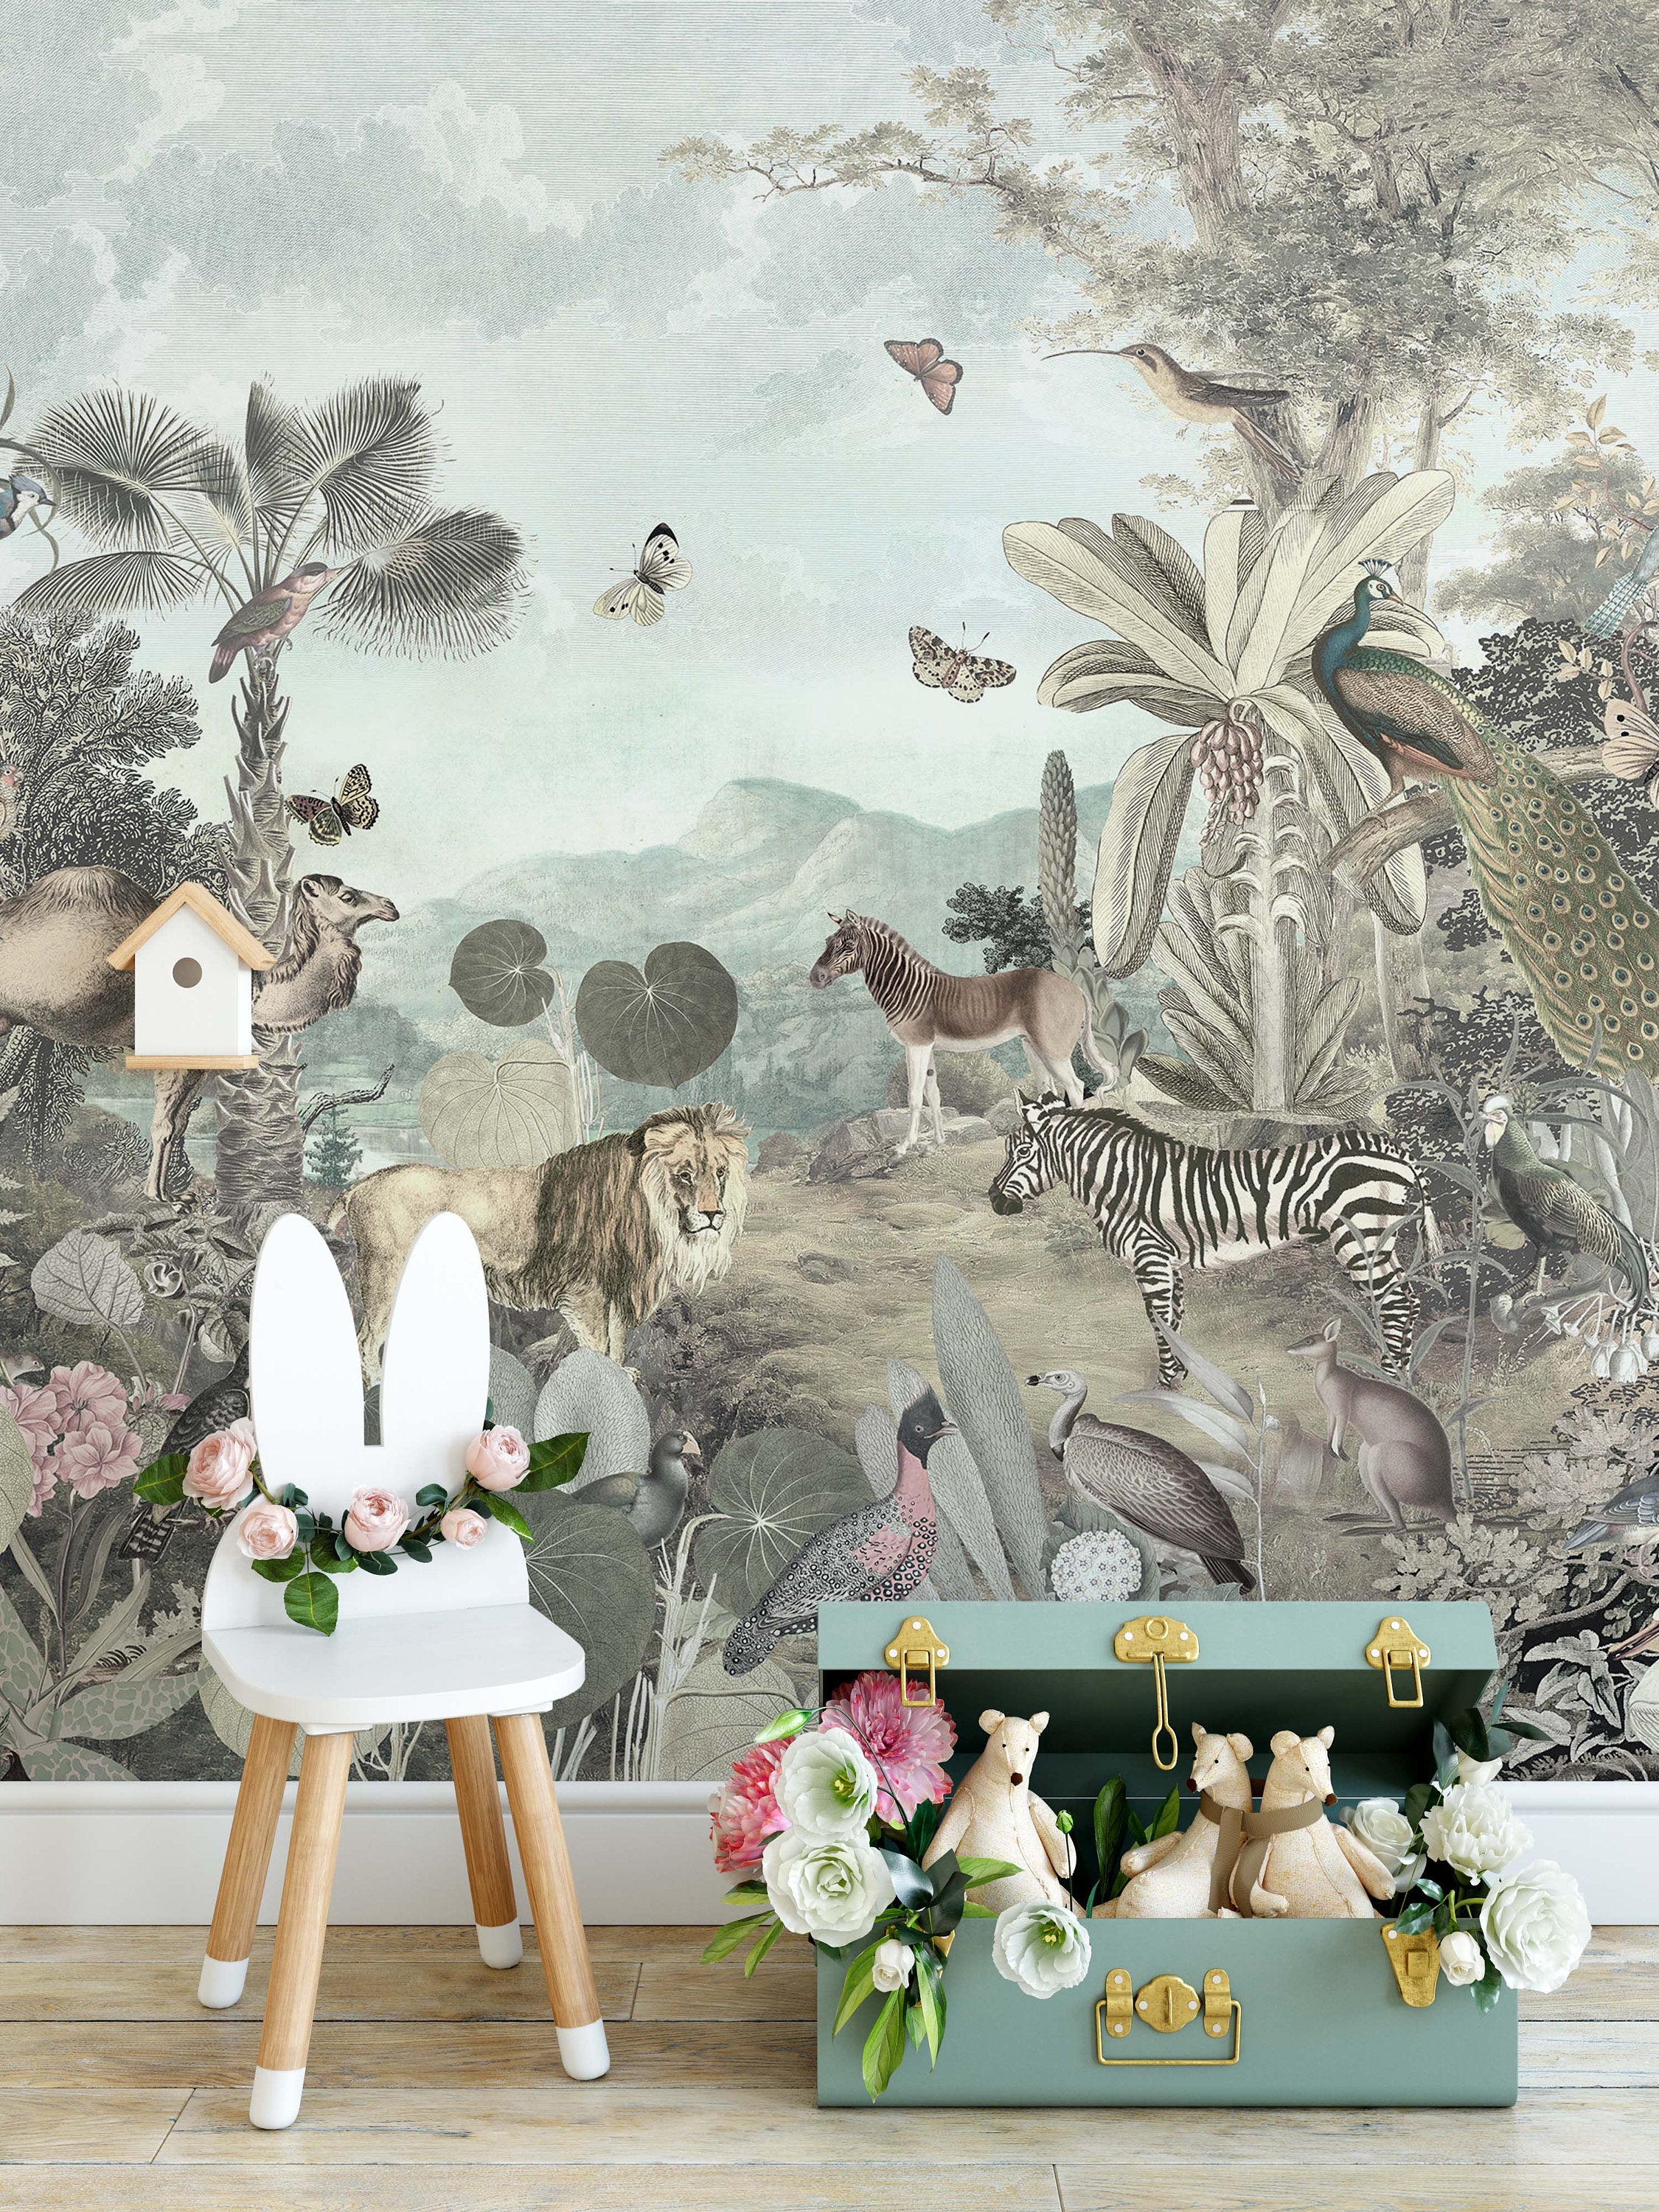 The Animals in Tropical Jungle Wallpaper Mural Home Decor